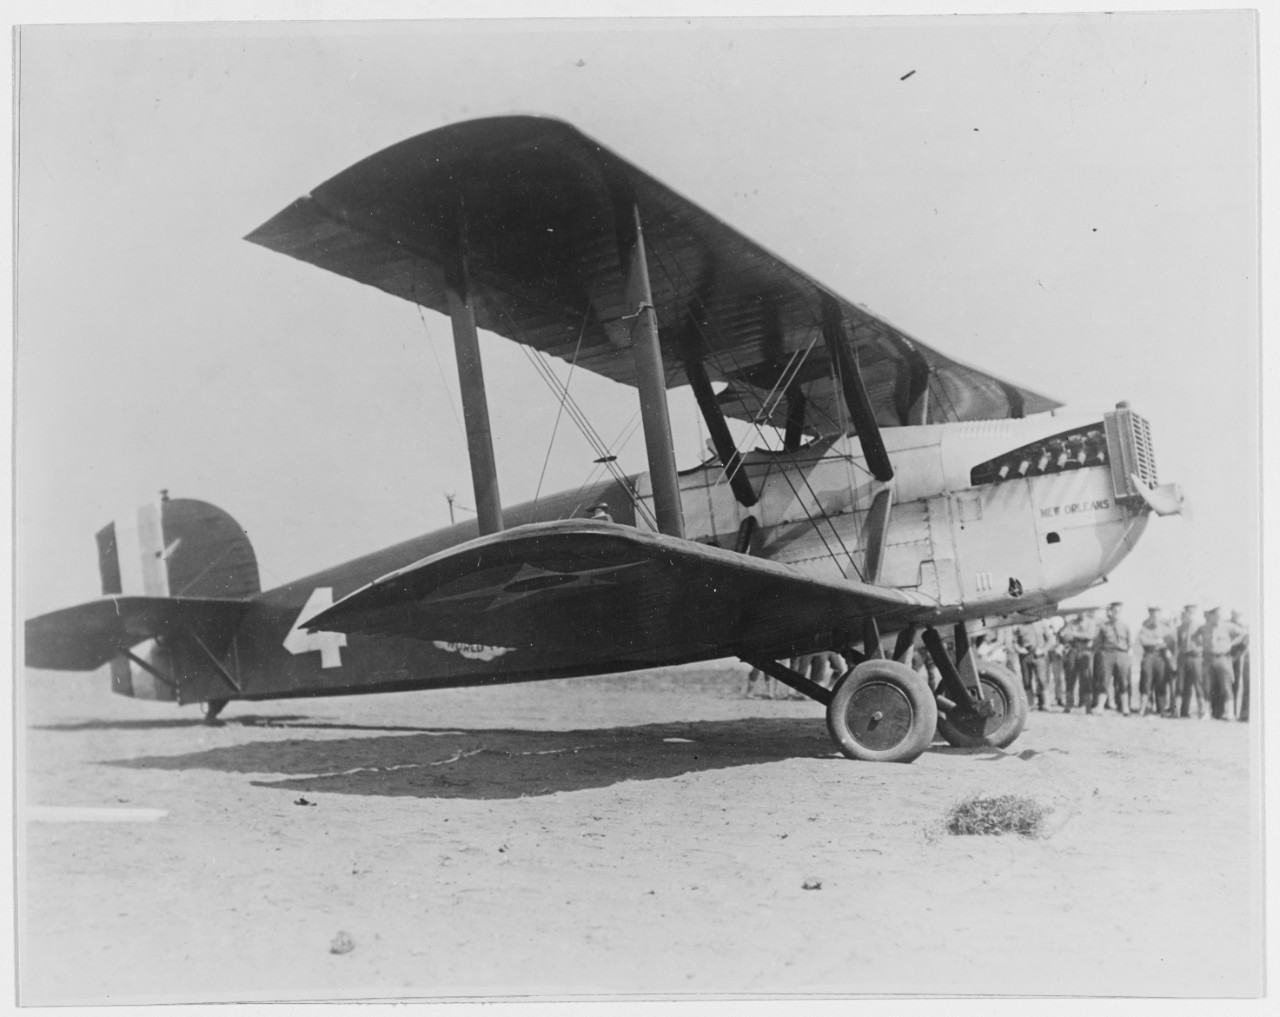 Army/Douglas Around the World Aircraft "New Orleans"